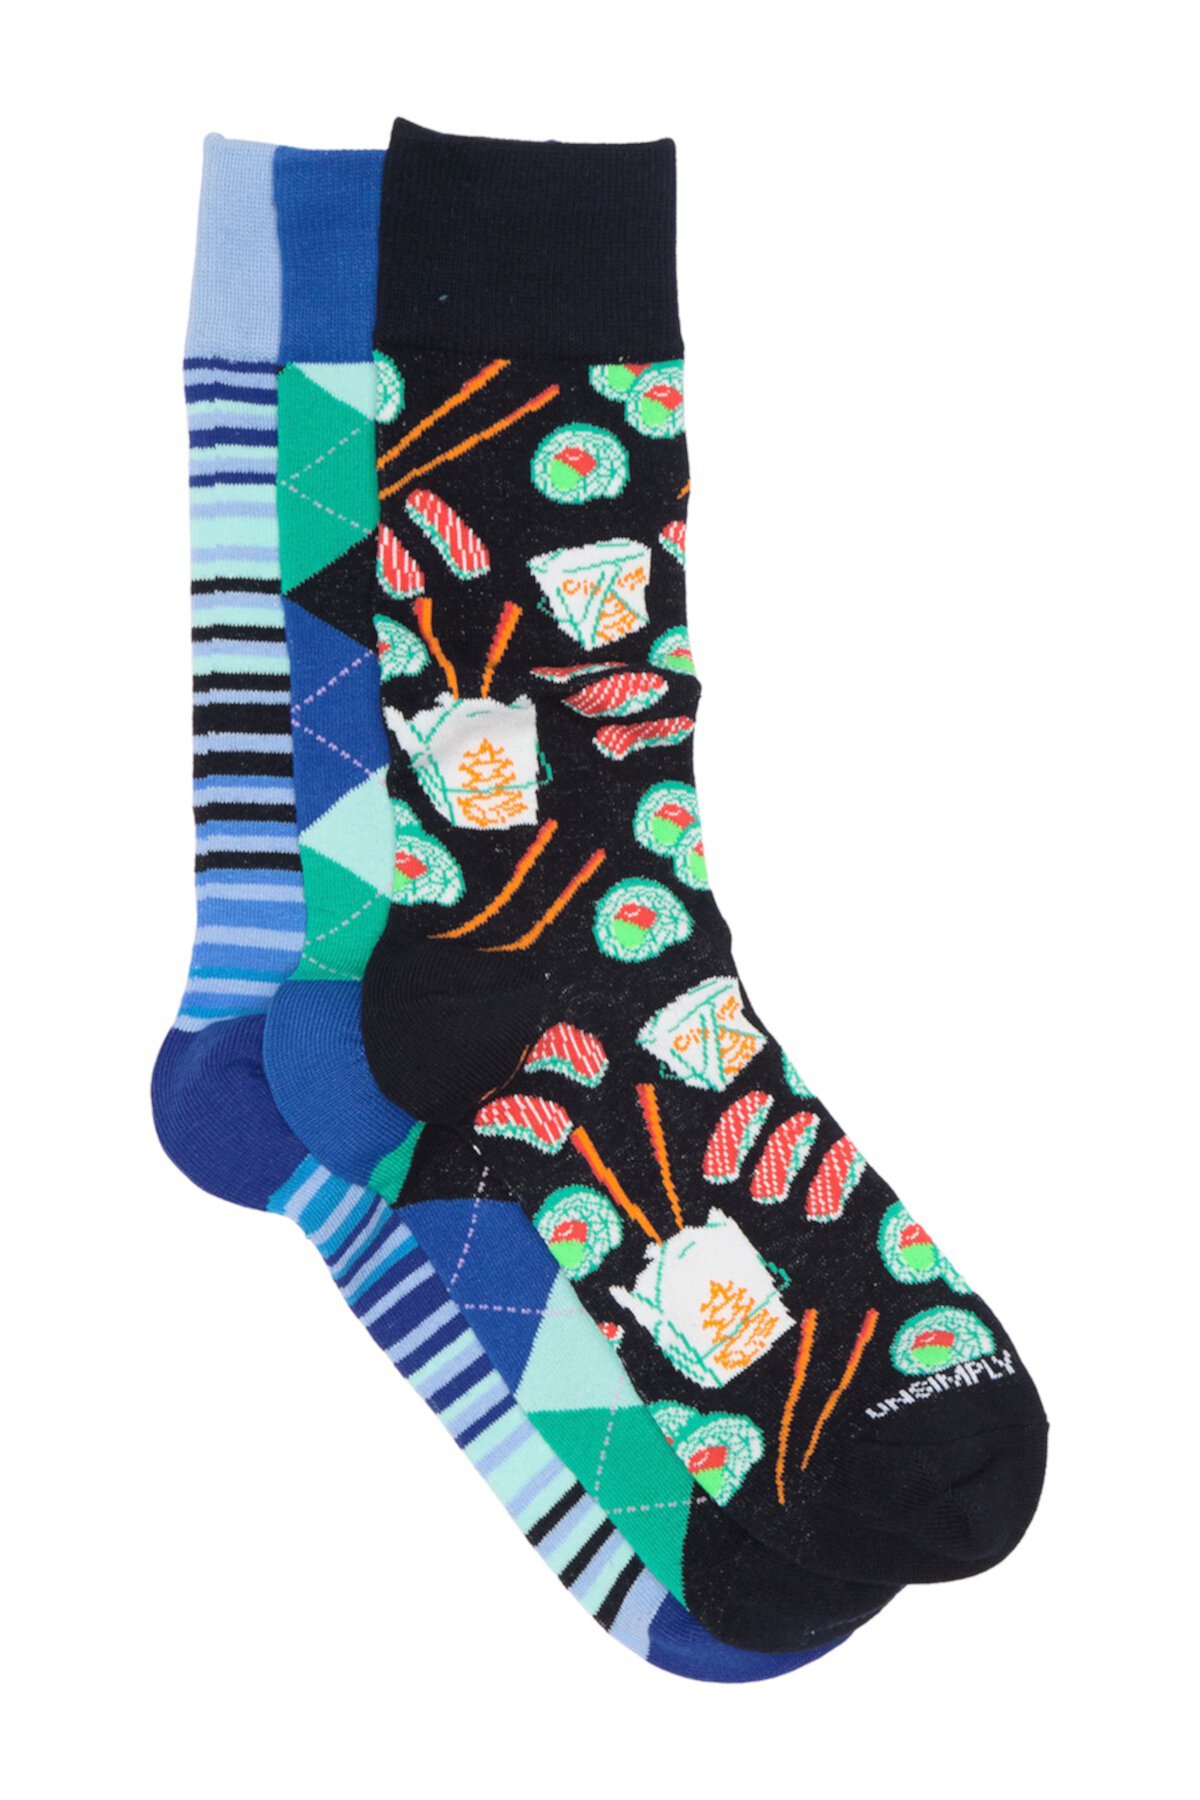 Printed Crew Socks - Pack of 3 Unsimply Stitched